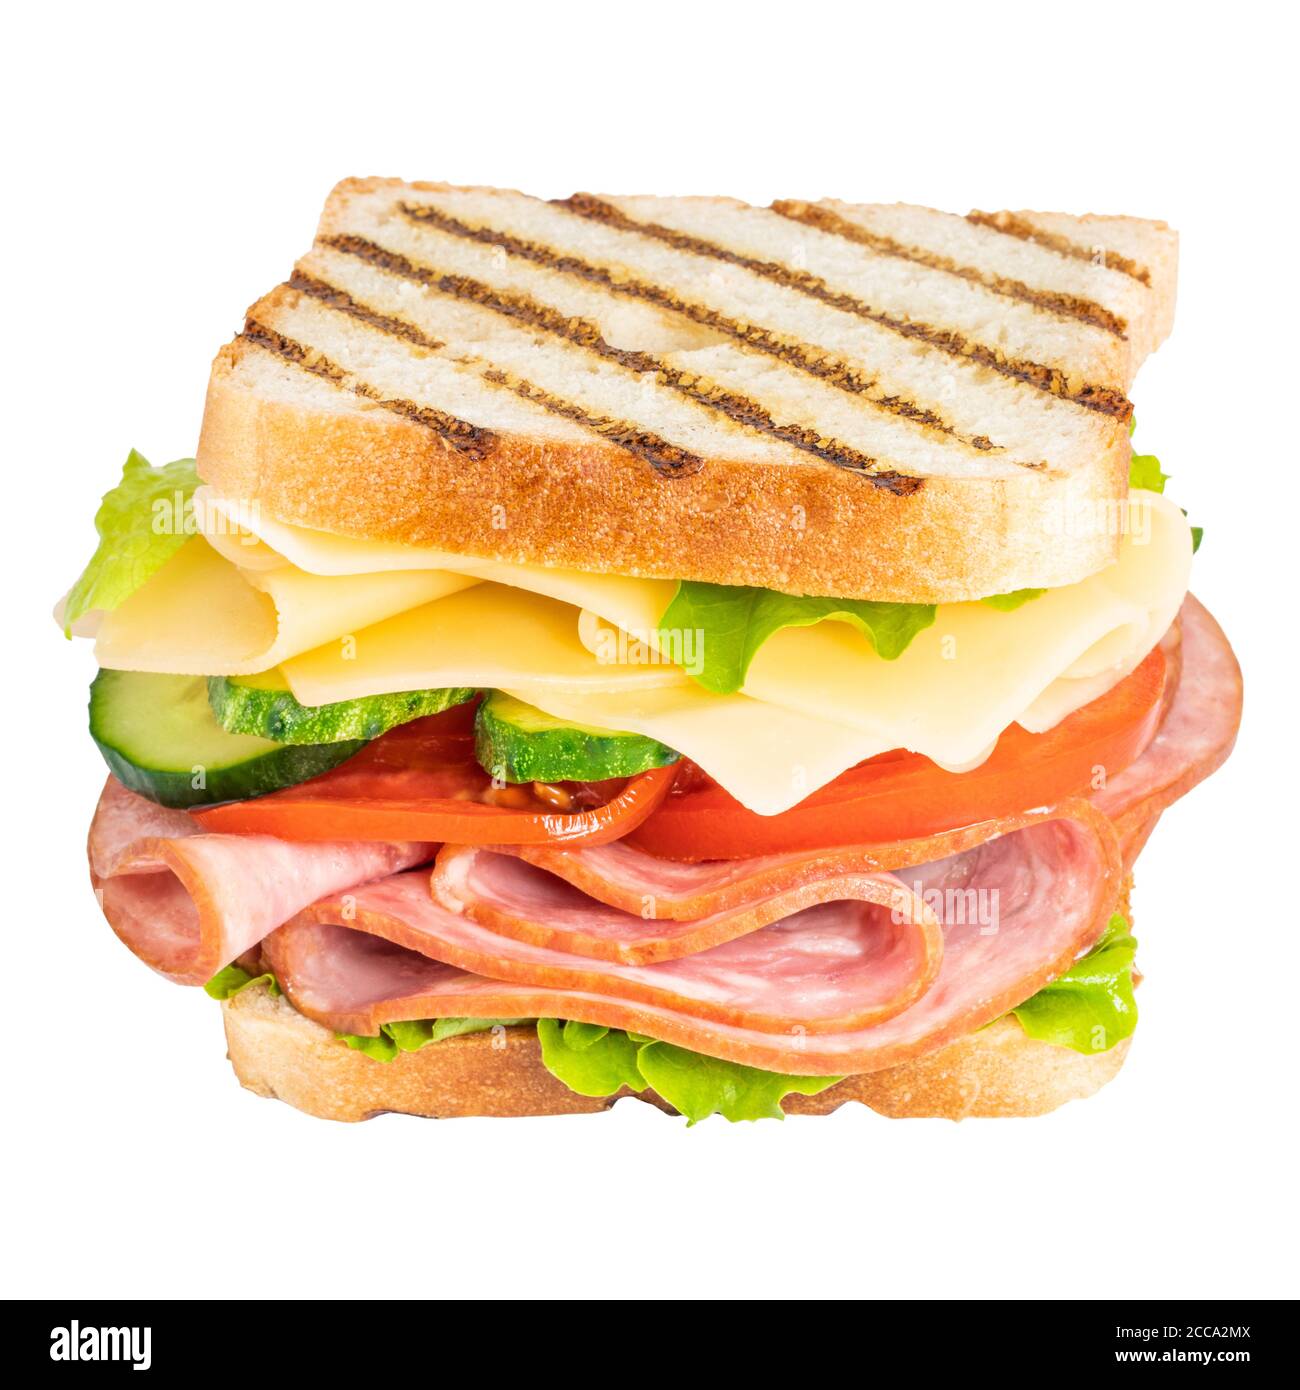 Sandwich with ham, cheese, tomato, lettuce and toasted bread isolated ...